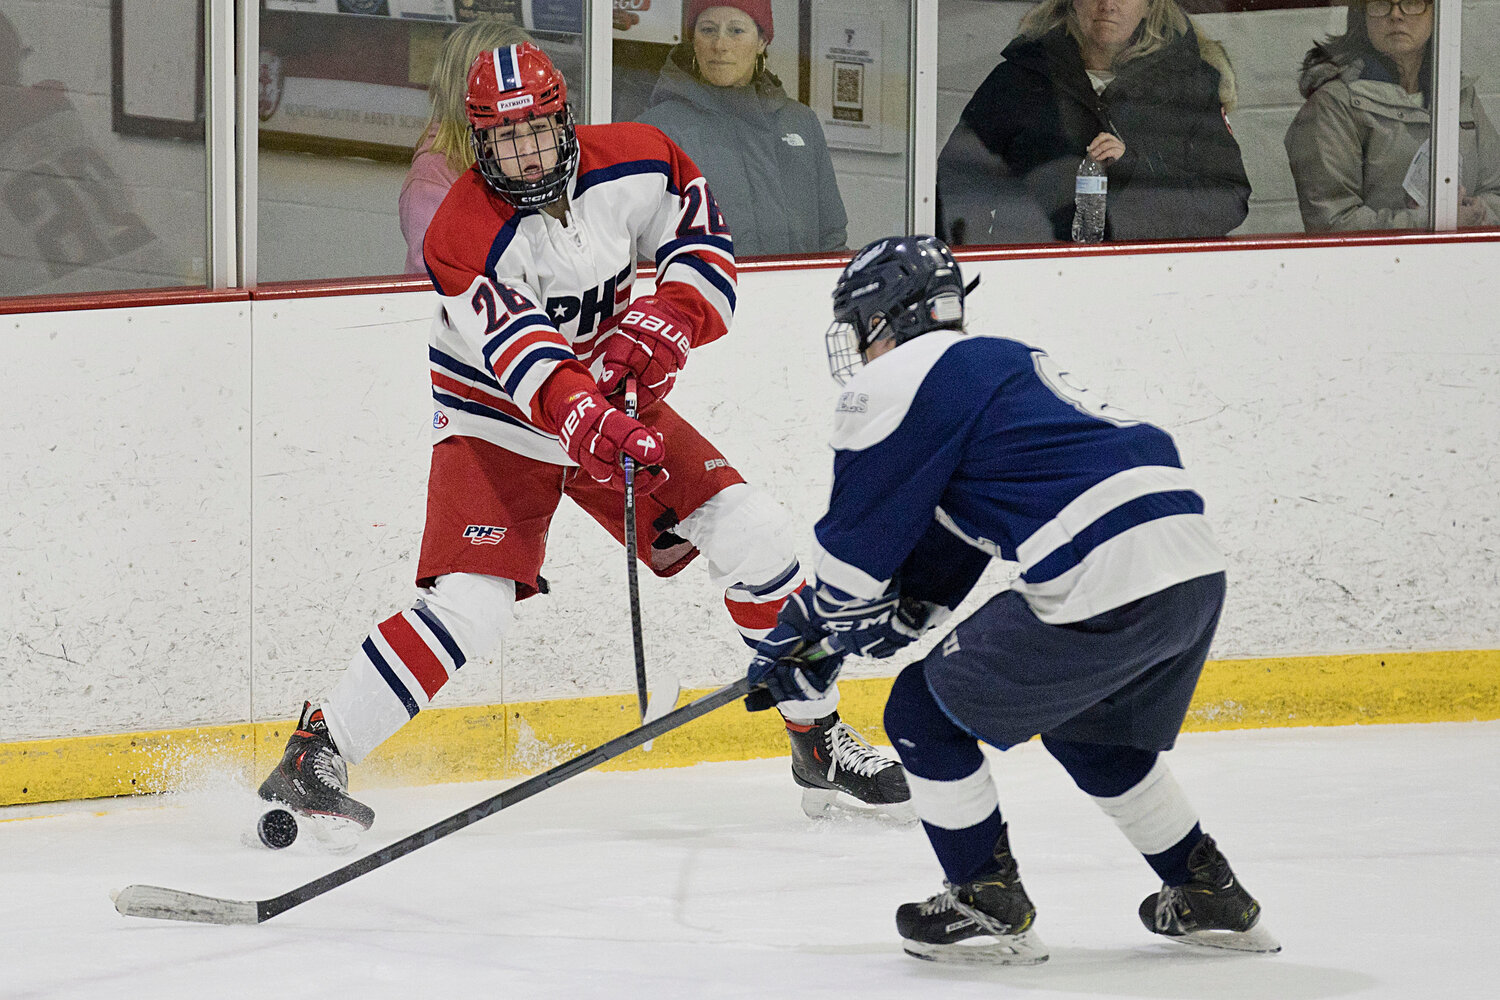 Hadrian Dougherty blocks a South Kingstown opponent from taking possession of the puck.